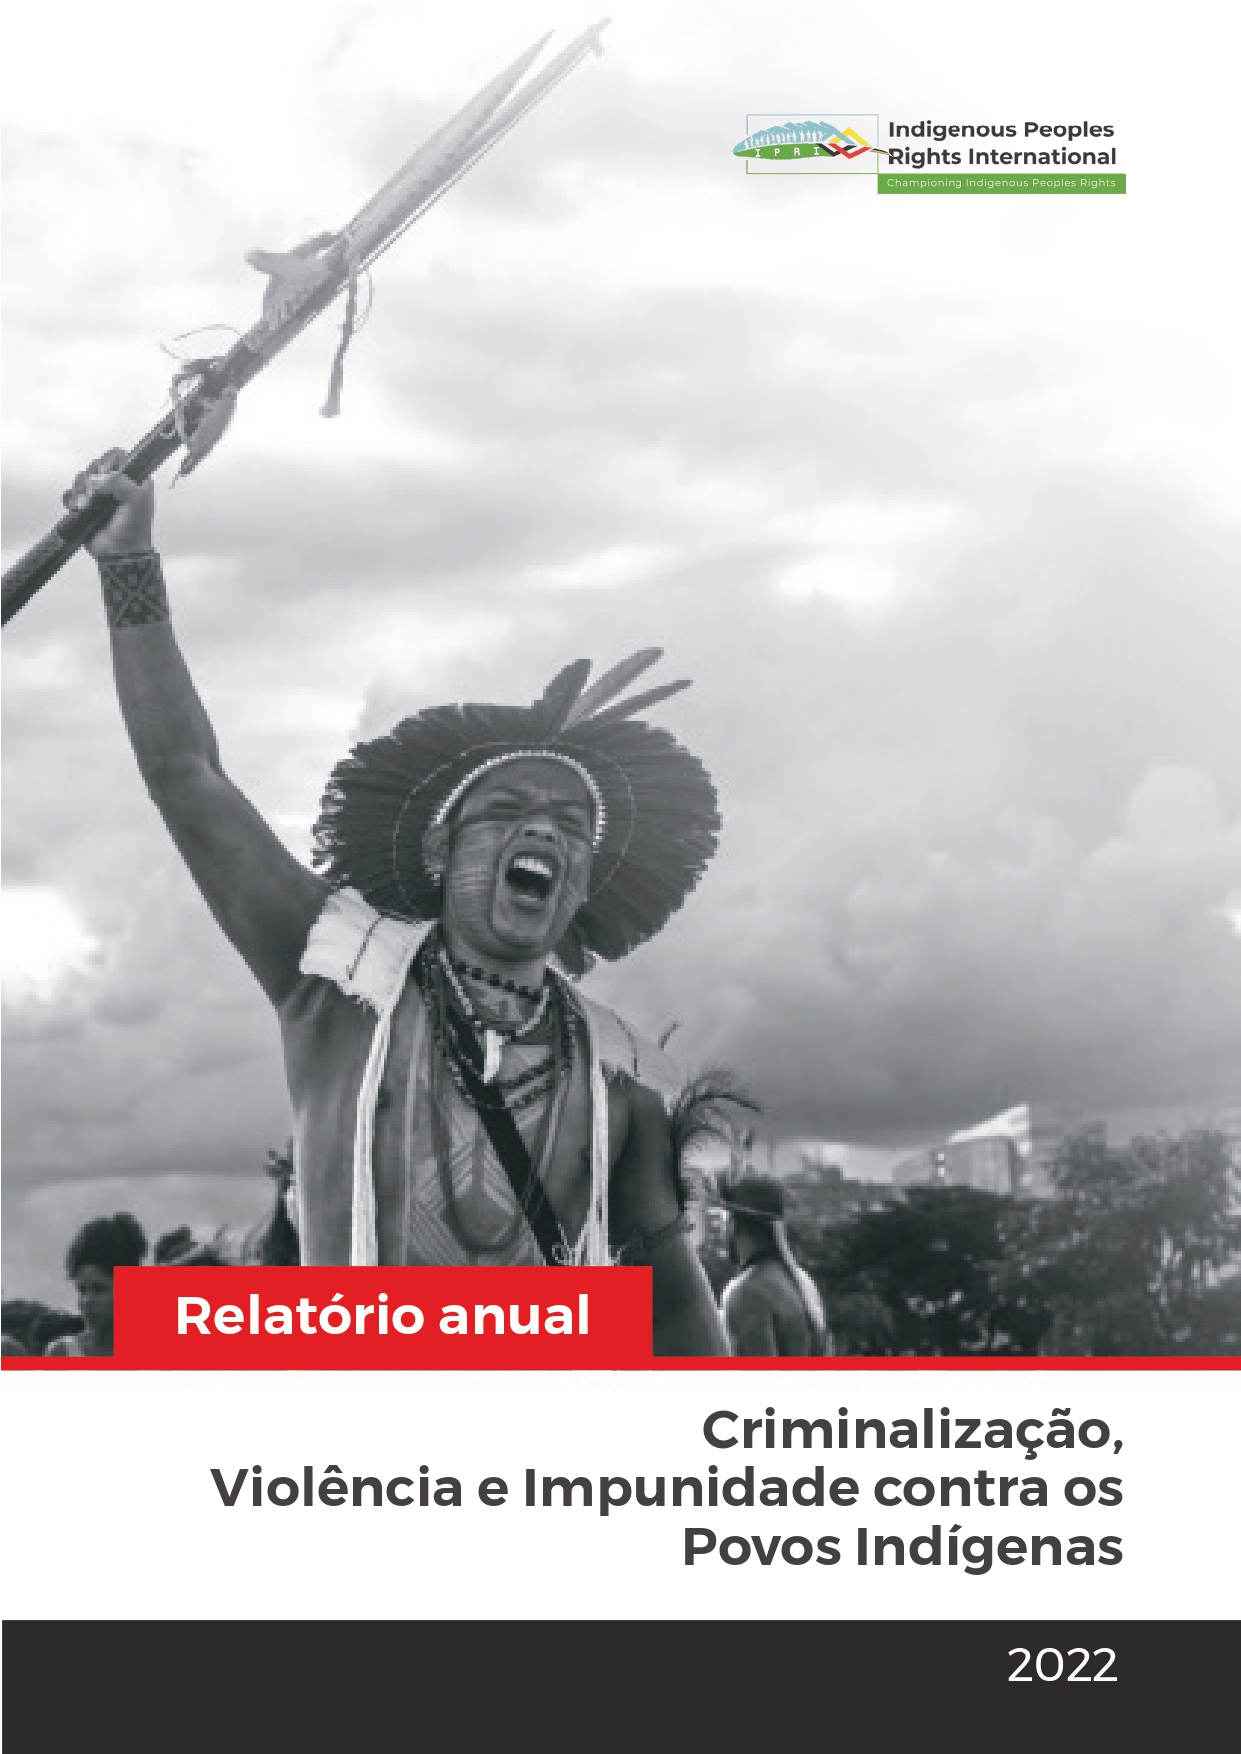 Annual Report: Criminalization of, Violence, and Impunity against Indigenous Peoples (2022)